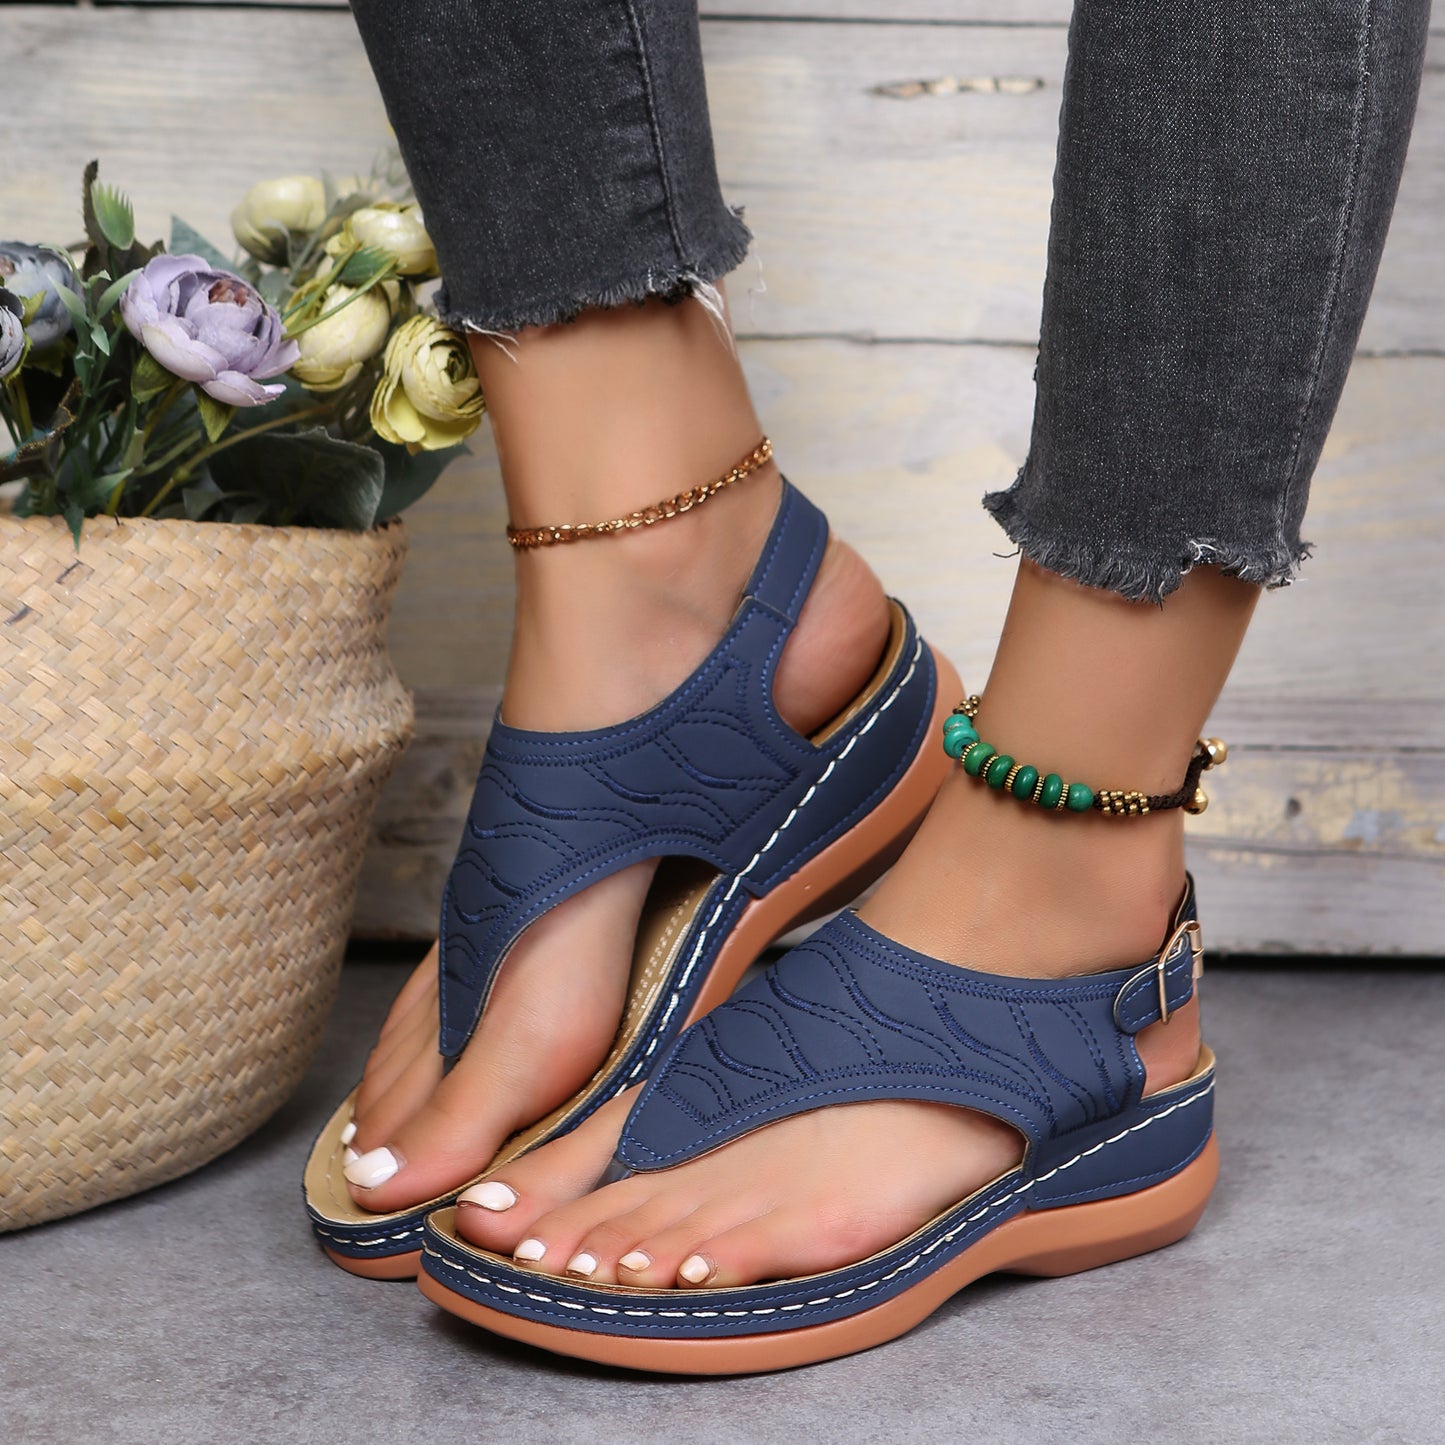 Summer Wedge Sandals for Women - Ankle Buckle Strap, Open Toe, Retro Style